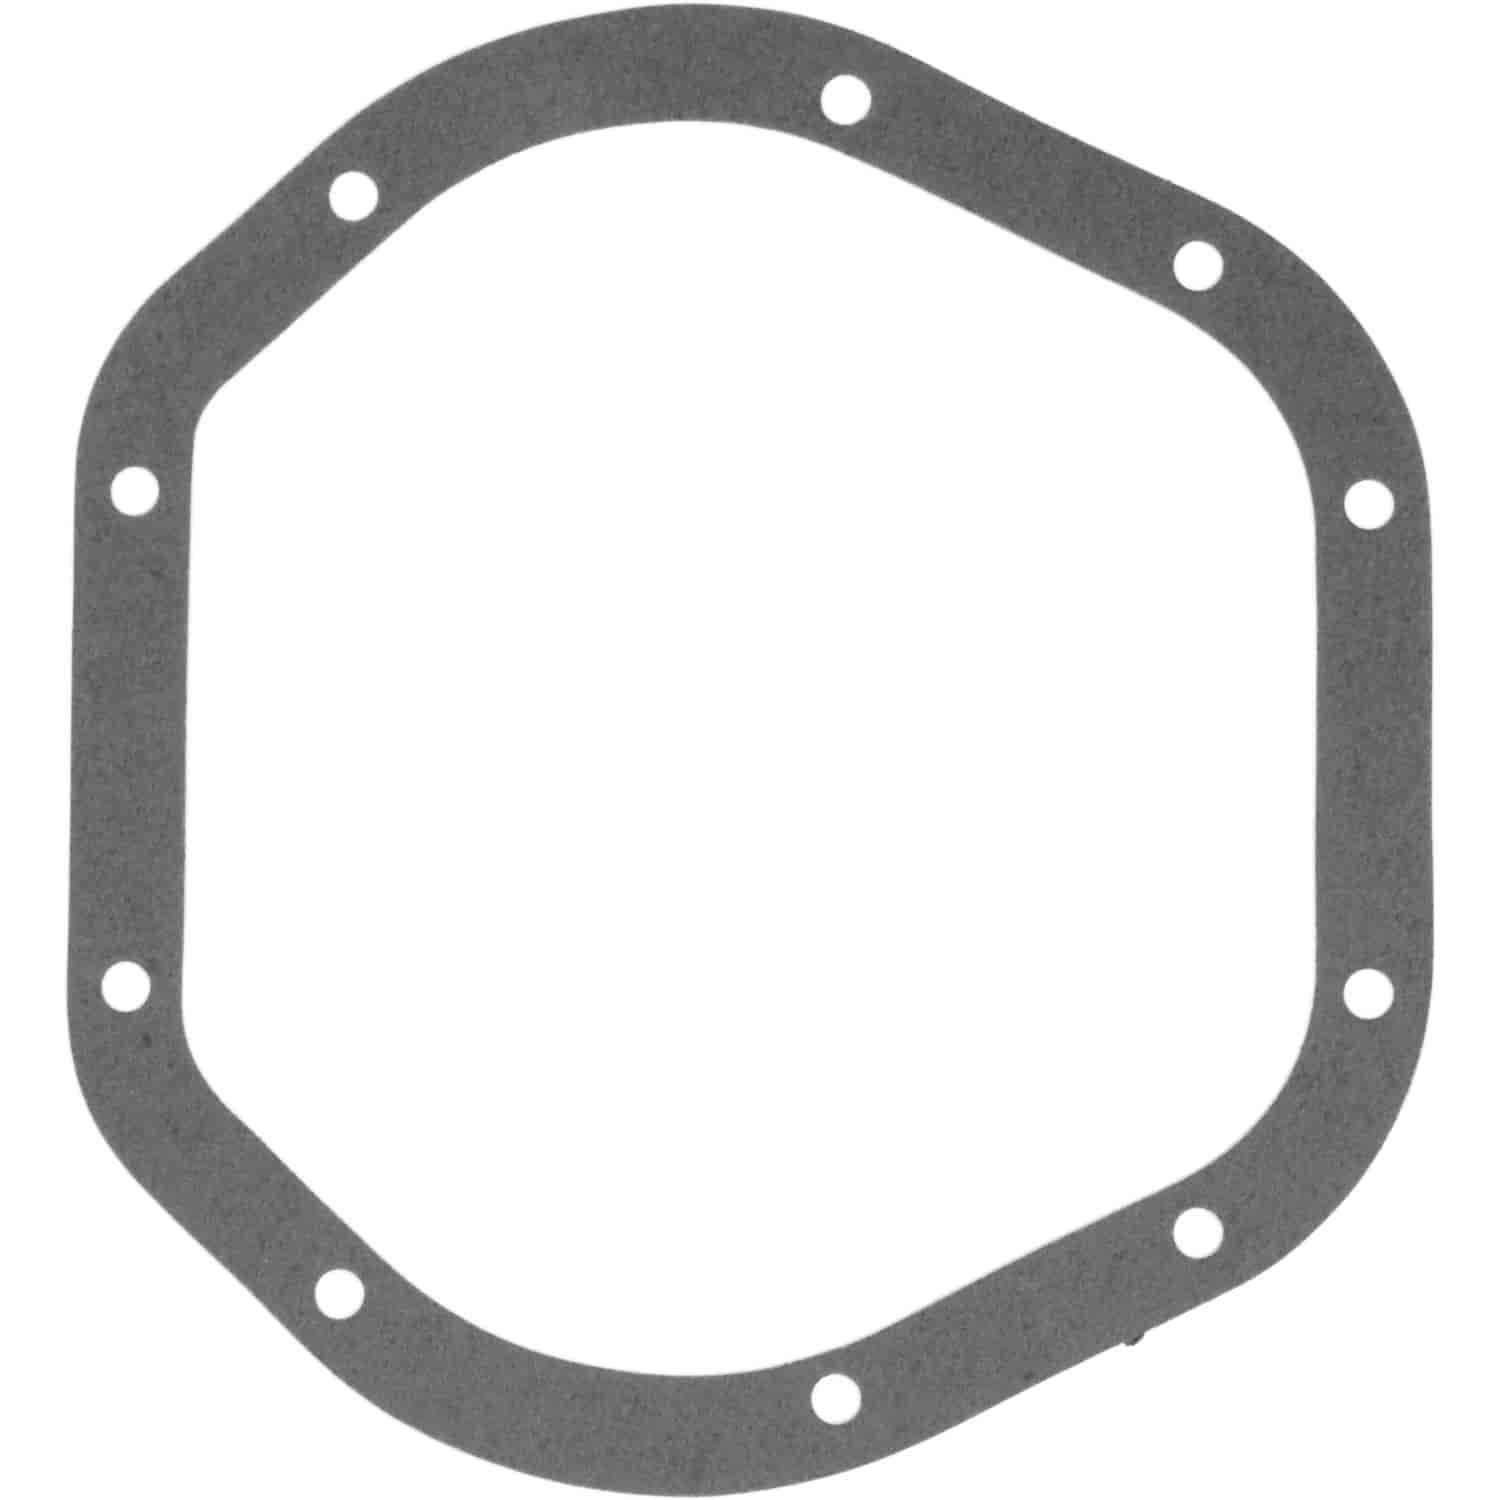 Differential Cover Gasket 10-Bolt Dana 44